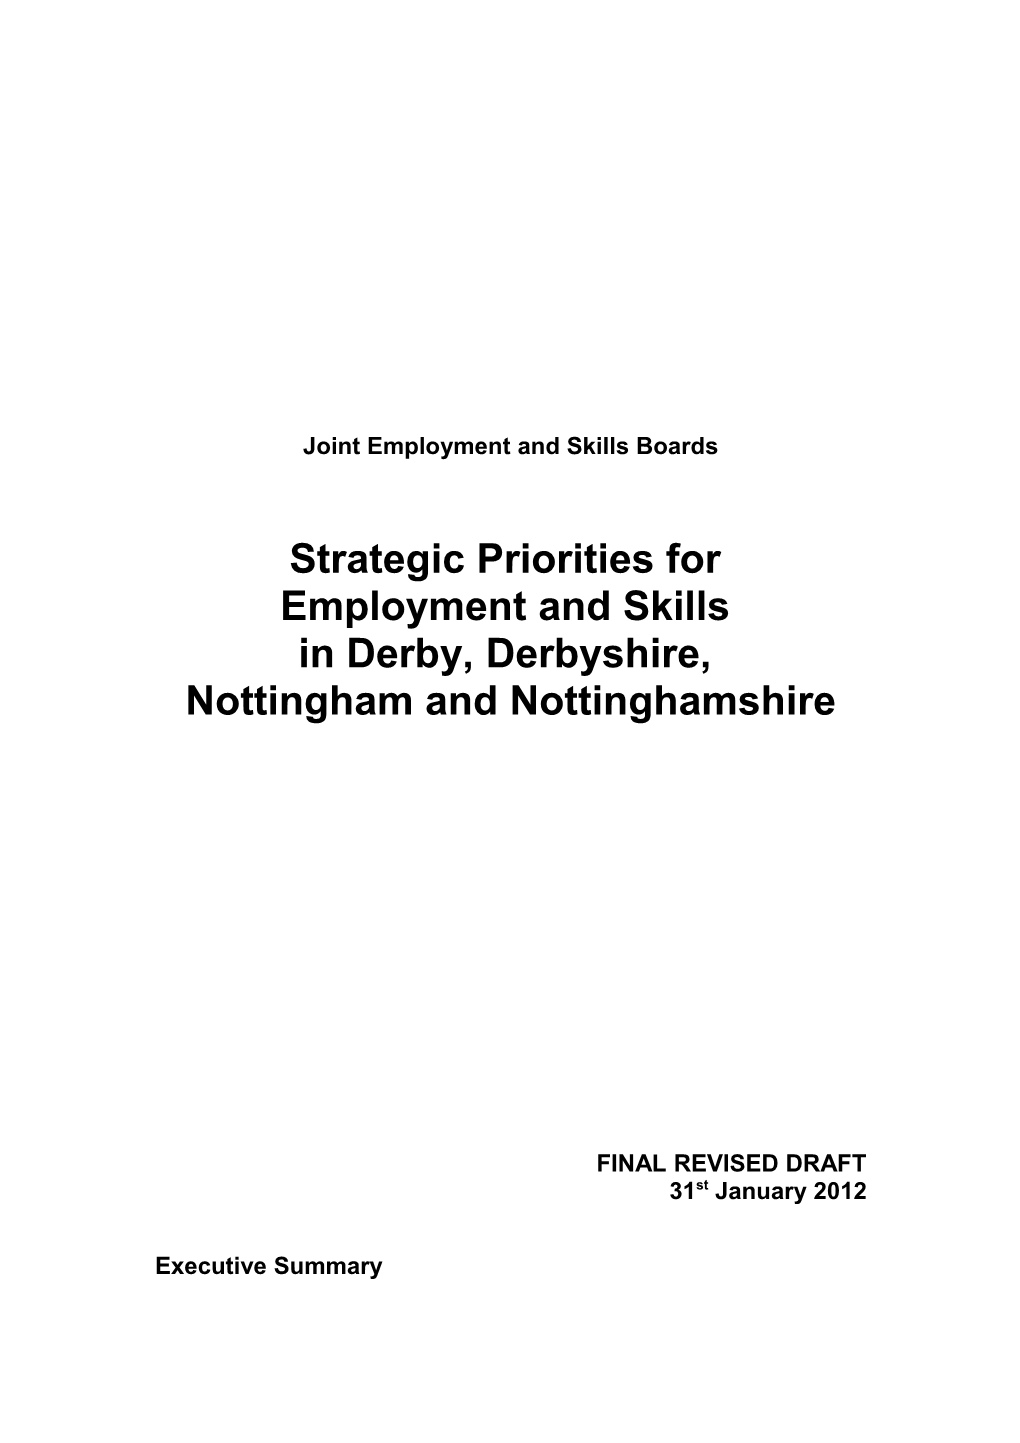 Strategic Priorities for Employment and Skills